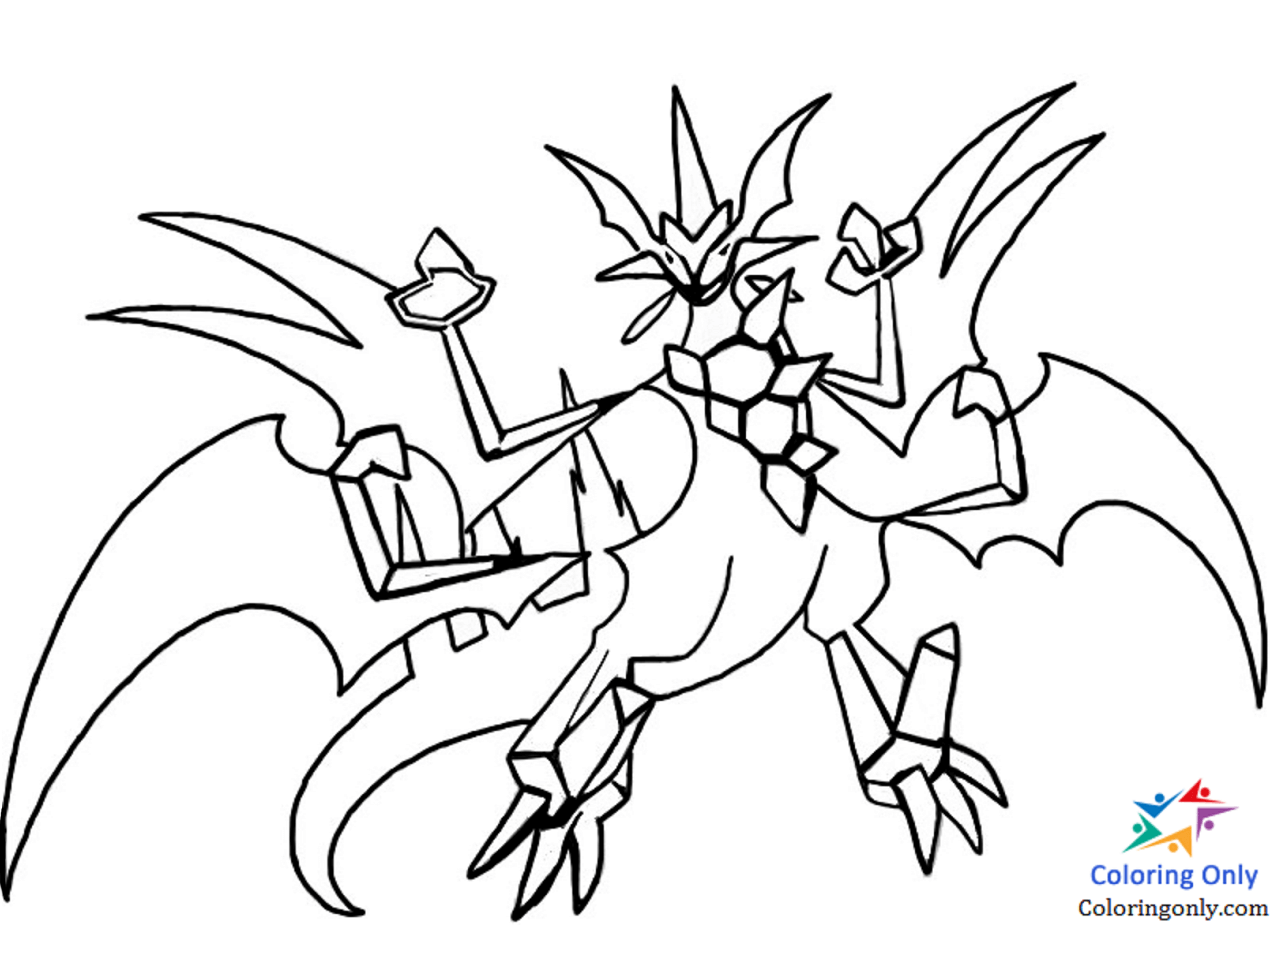 Ash Greninja Coloring Page - Free Printable Coloring Pages for Kids